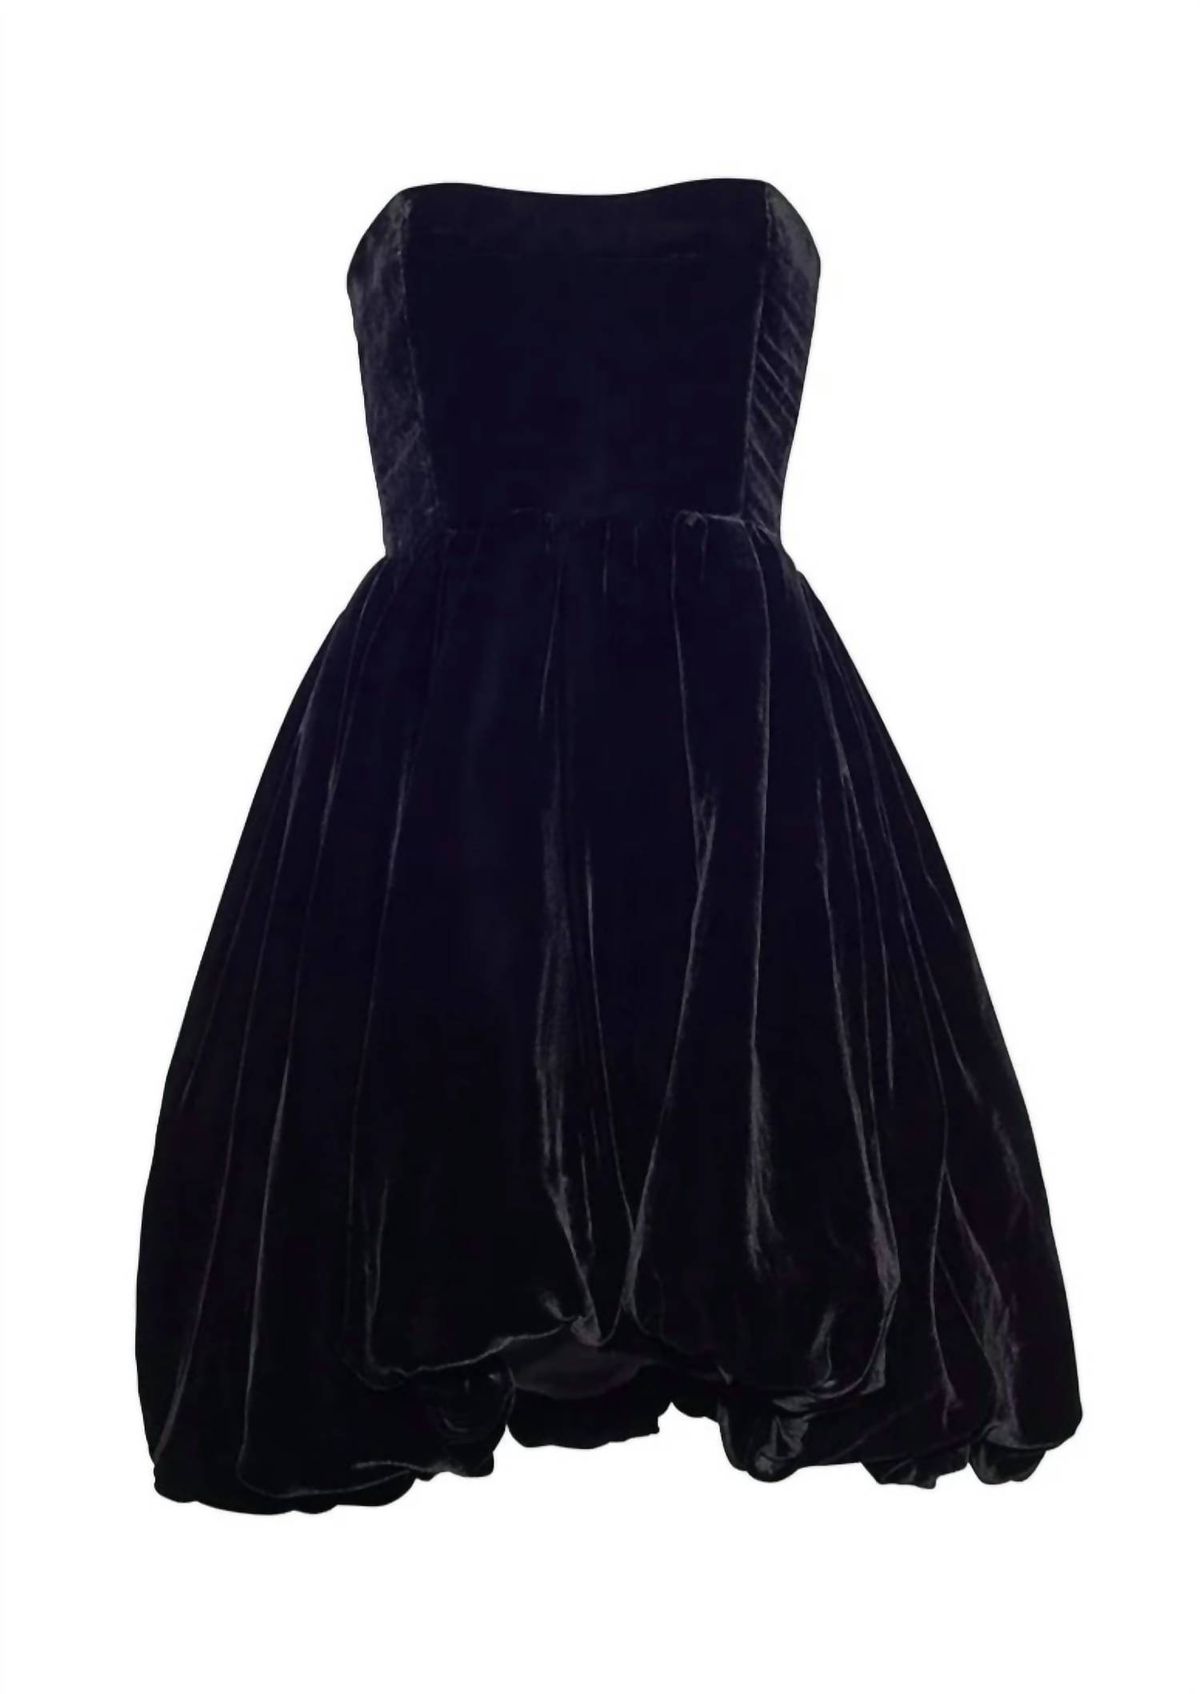 Style 1-2180039089-1498 Cara Cara Size 4 Homecoming Strapless Velvet Black Cocktail Dress on Queenly